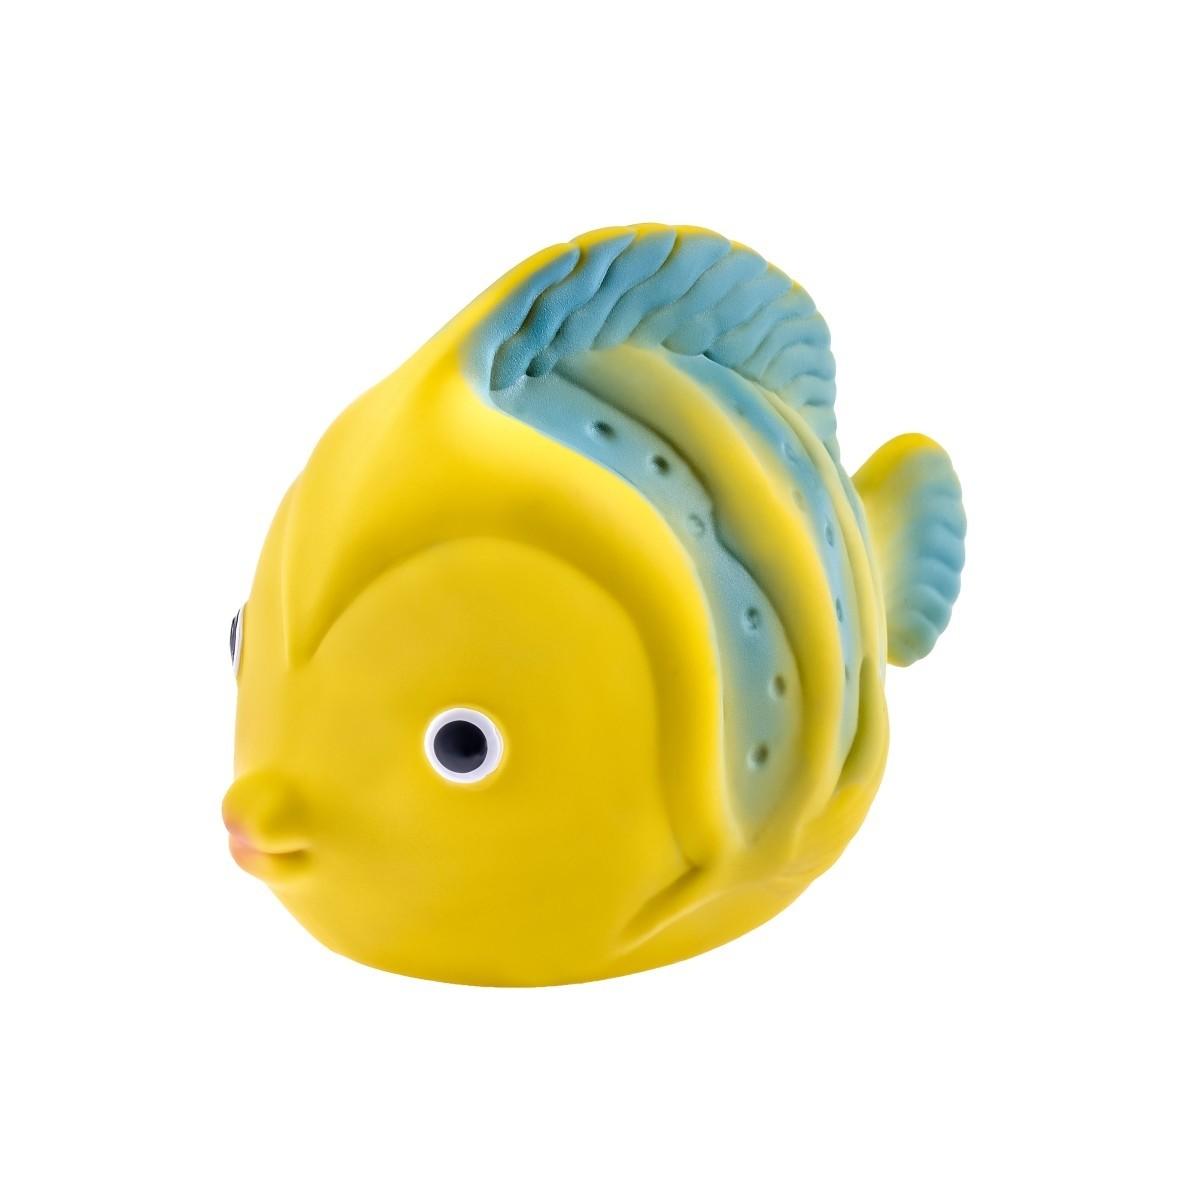 Yellow fish toy with blue highlights